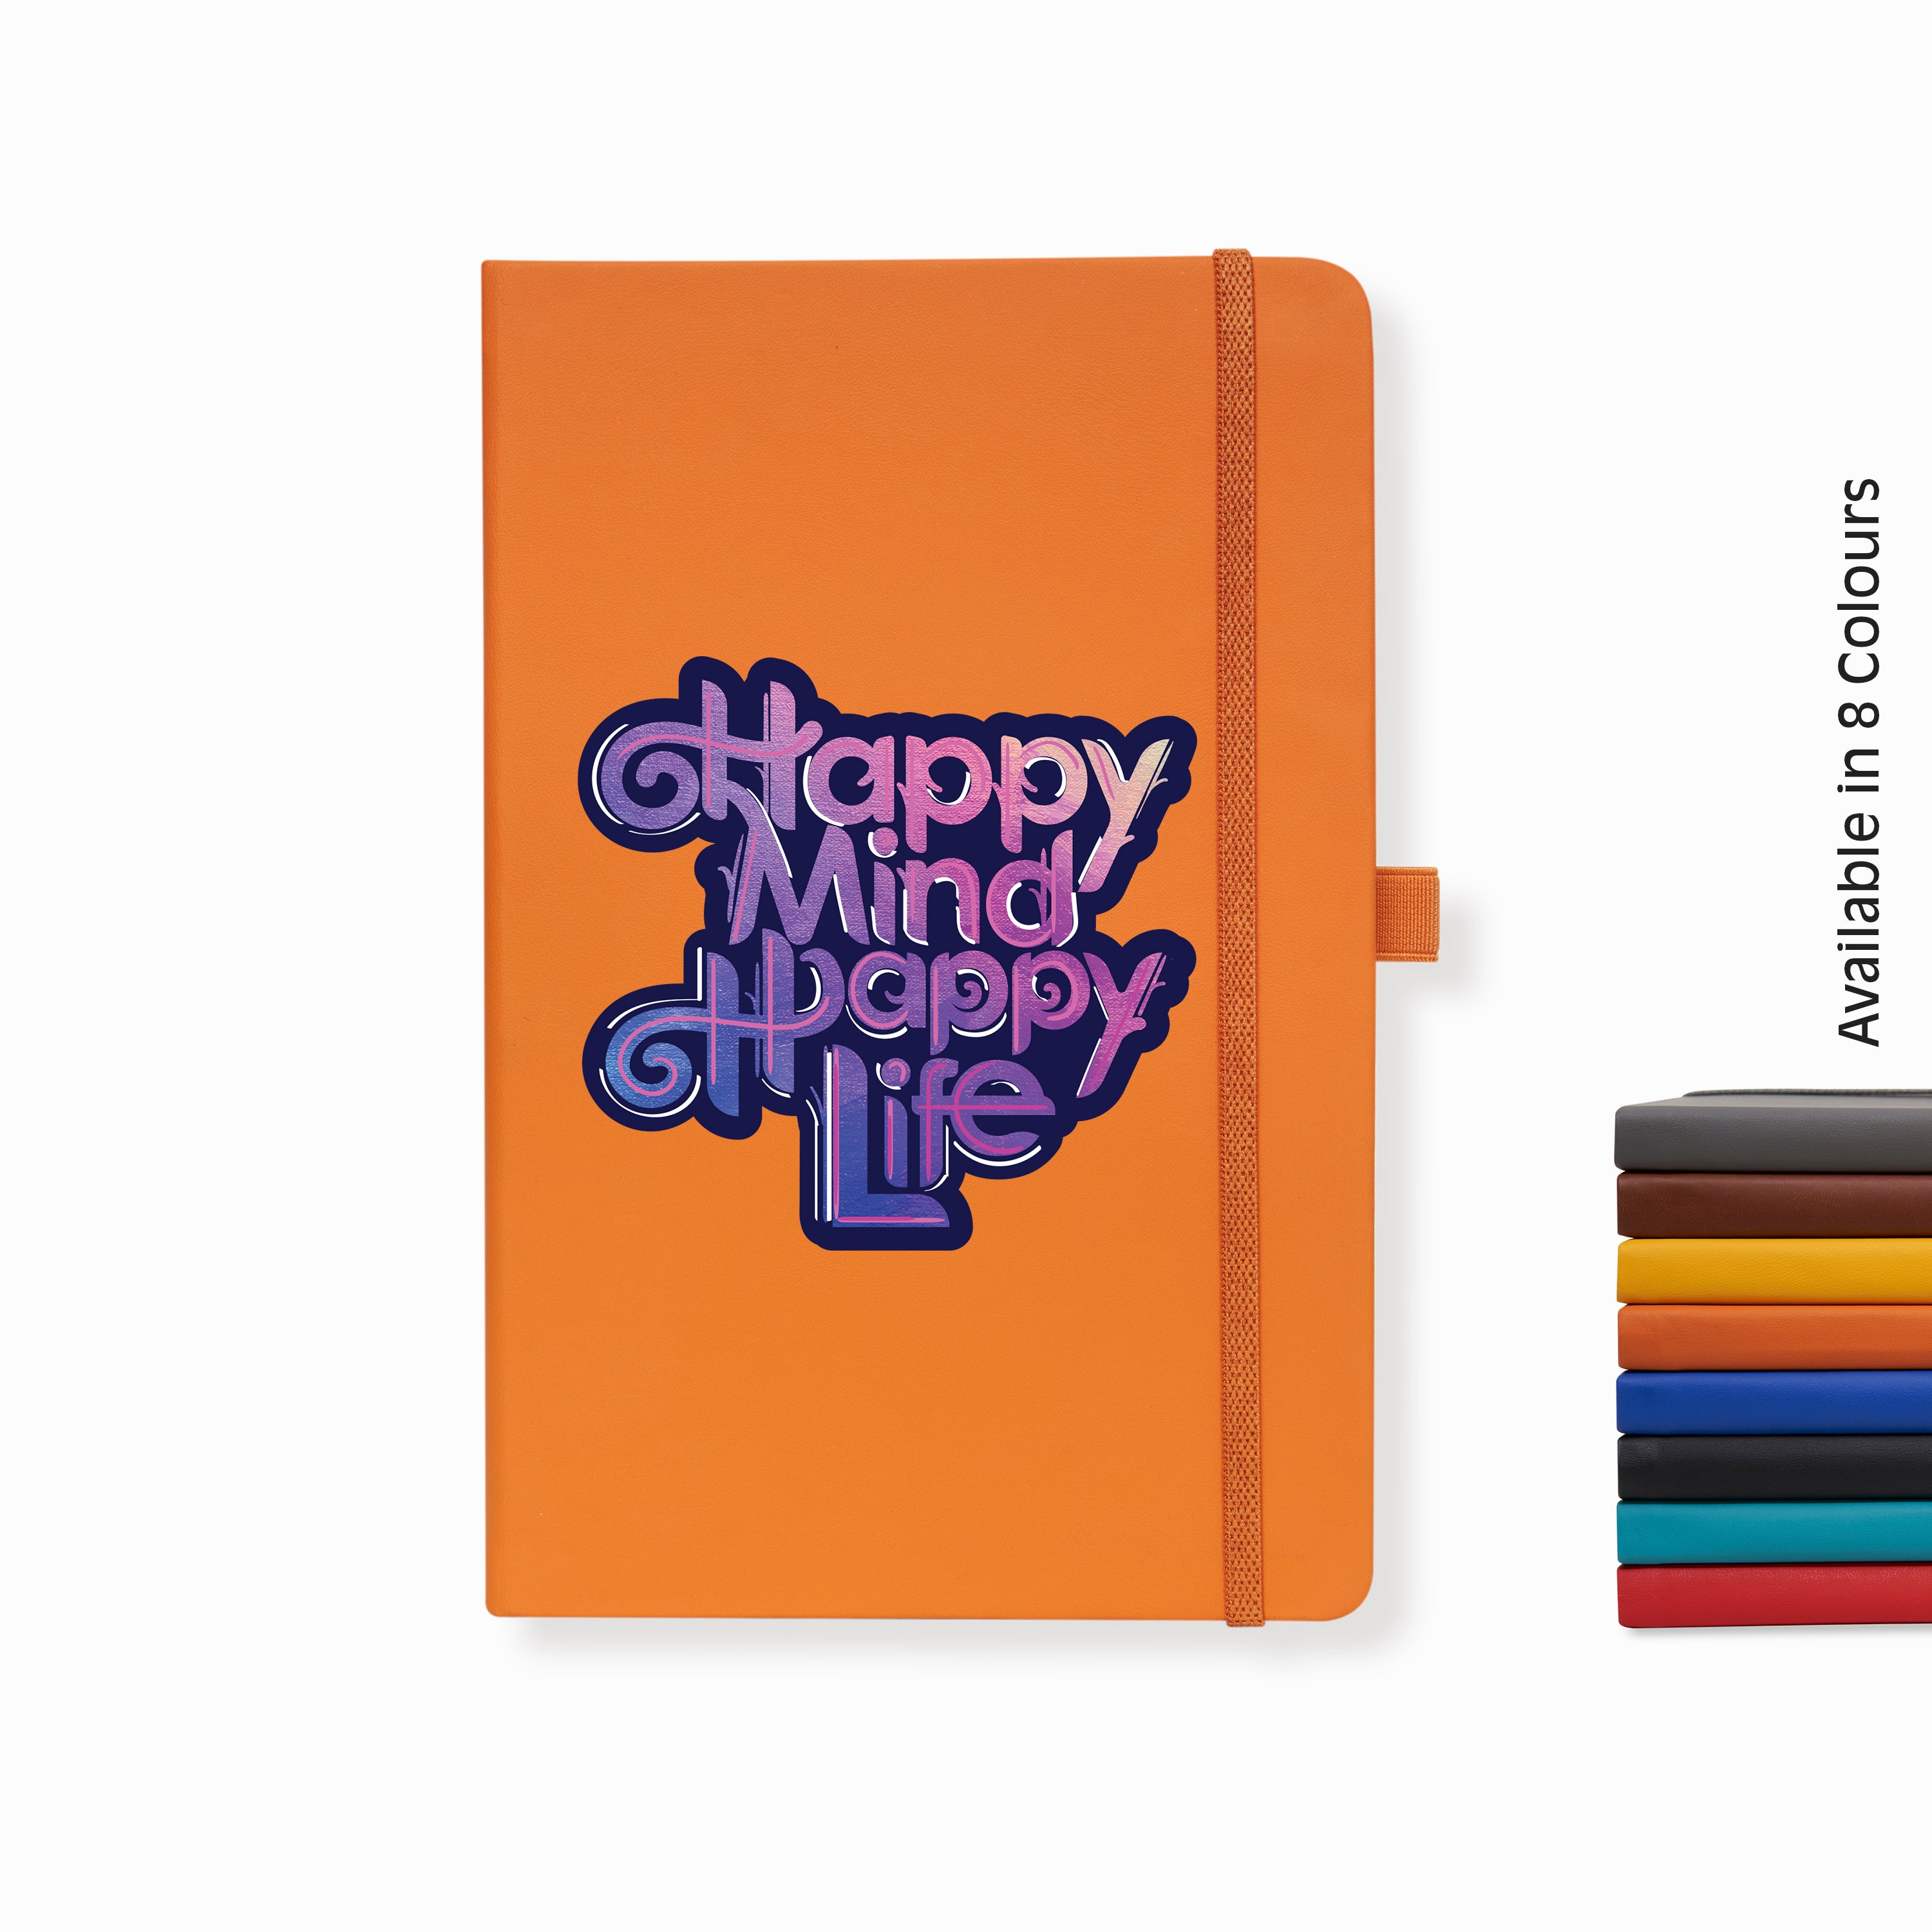 Pro Series Executive A5 PU Leather Hardbound Ruled Orange Notebook with Pen Loop [Happy Mind Happy Life]